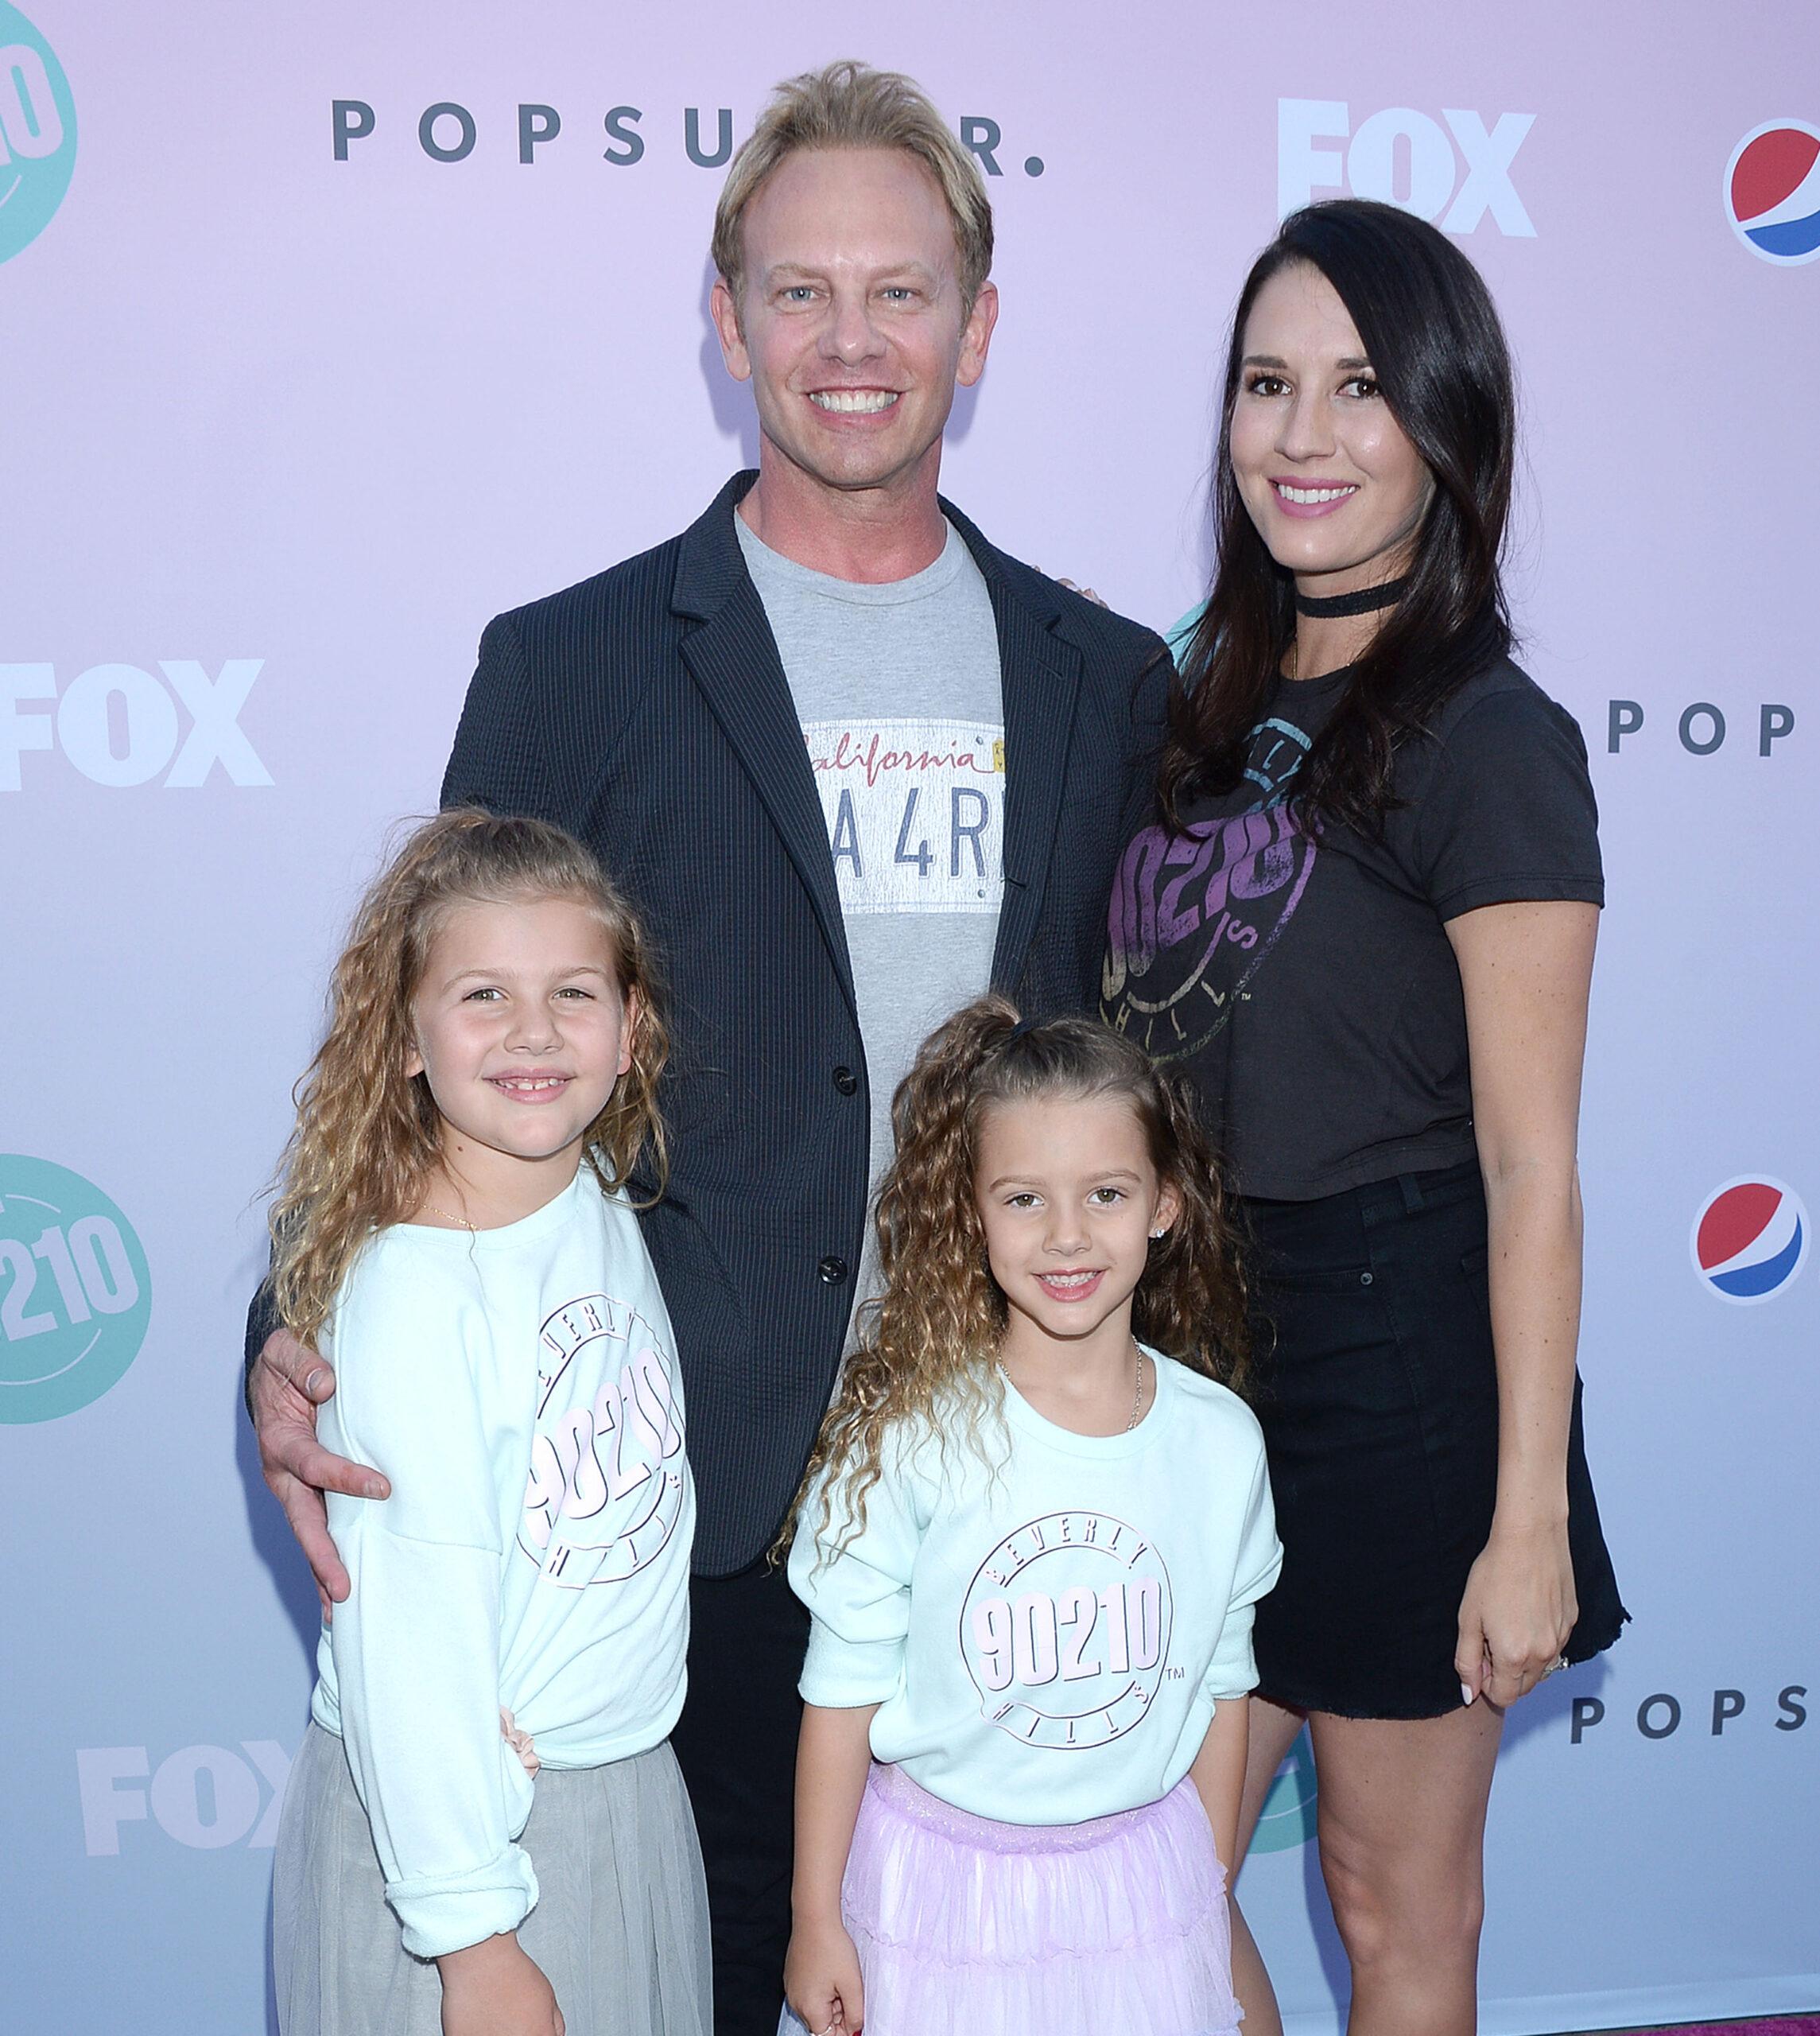 '90210' Star Ian Ziering Paying Ex-Wife $350,000 In Divorce, Keeping His Guns